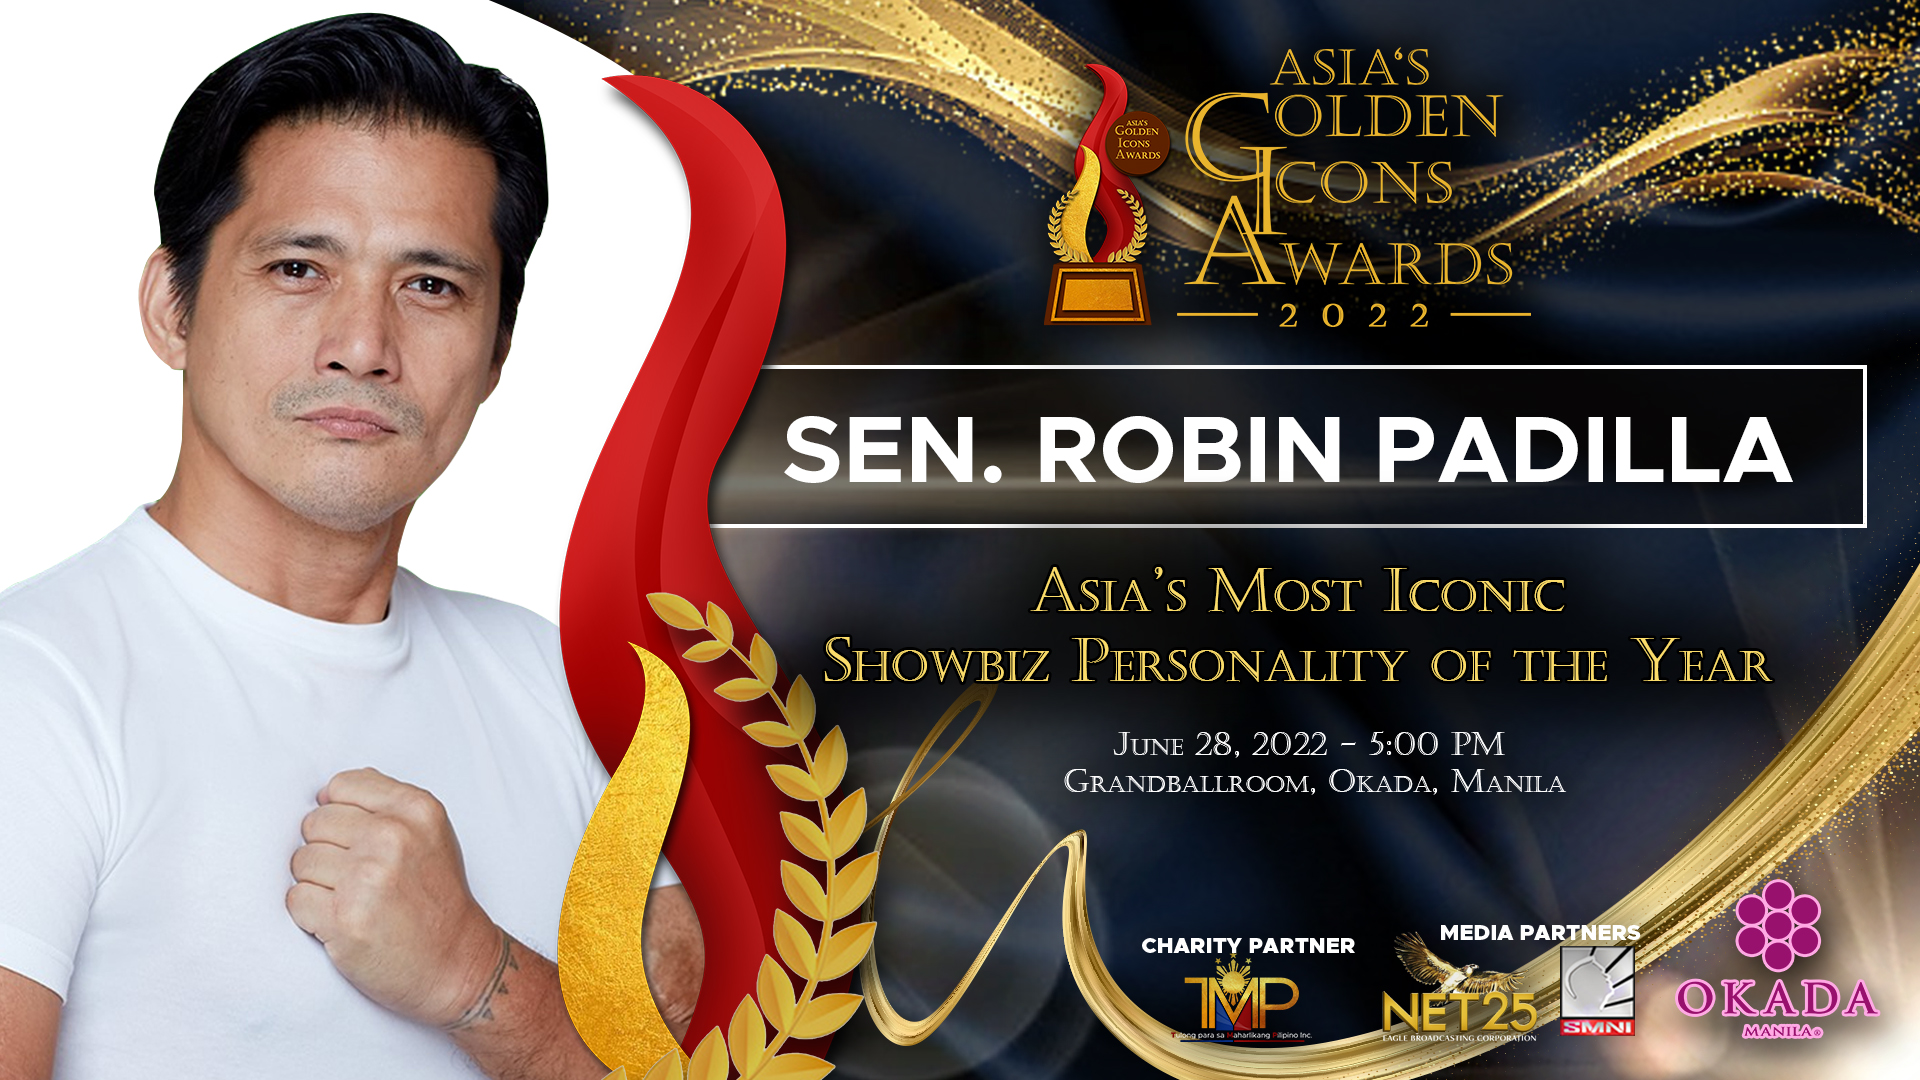 Robin Padilla (Asia's Most Iconic Showbiz Personality of the Year)